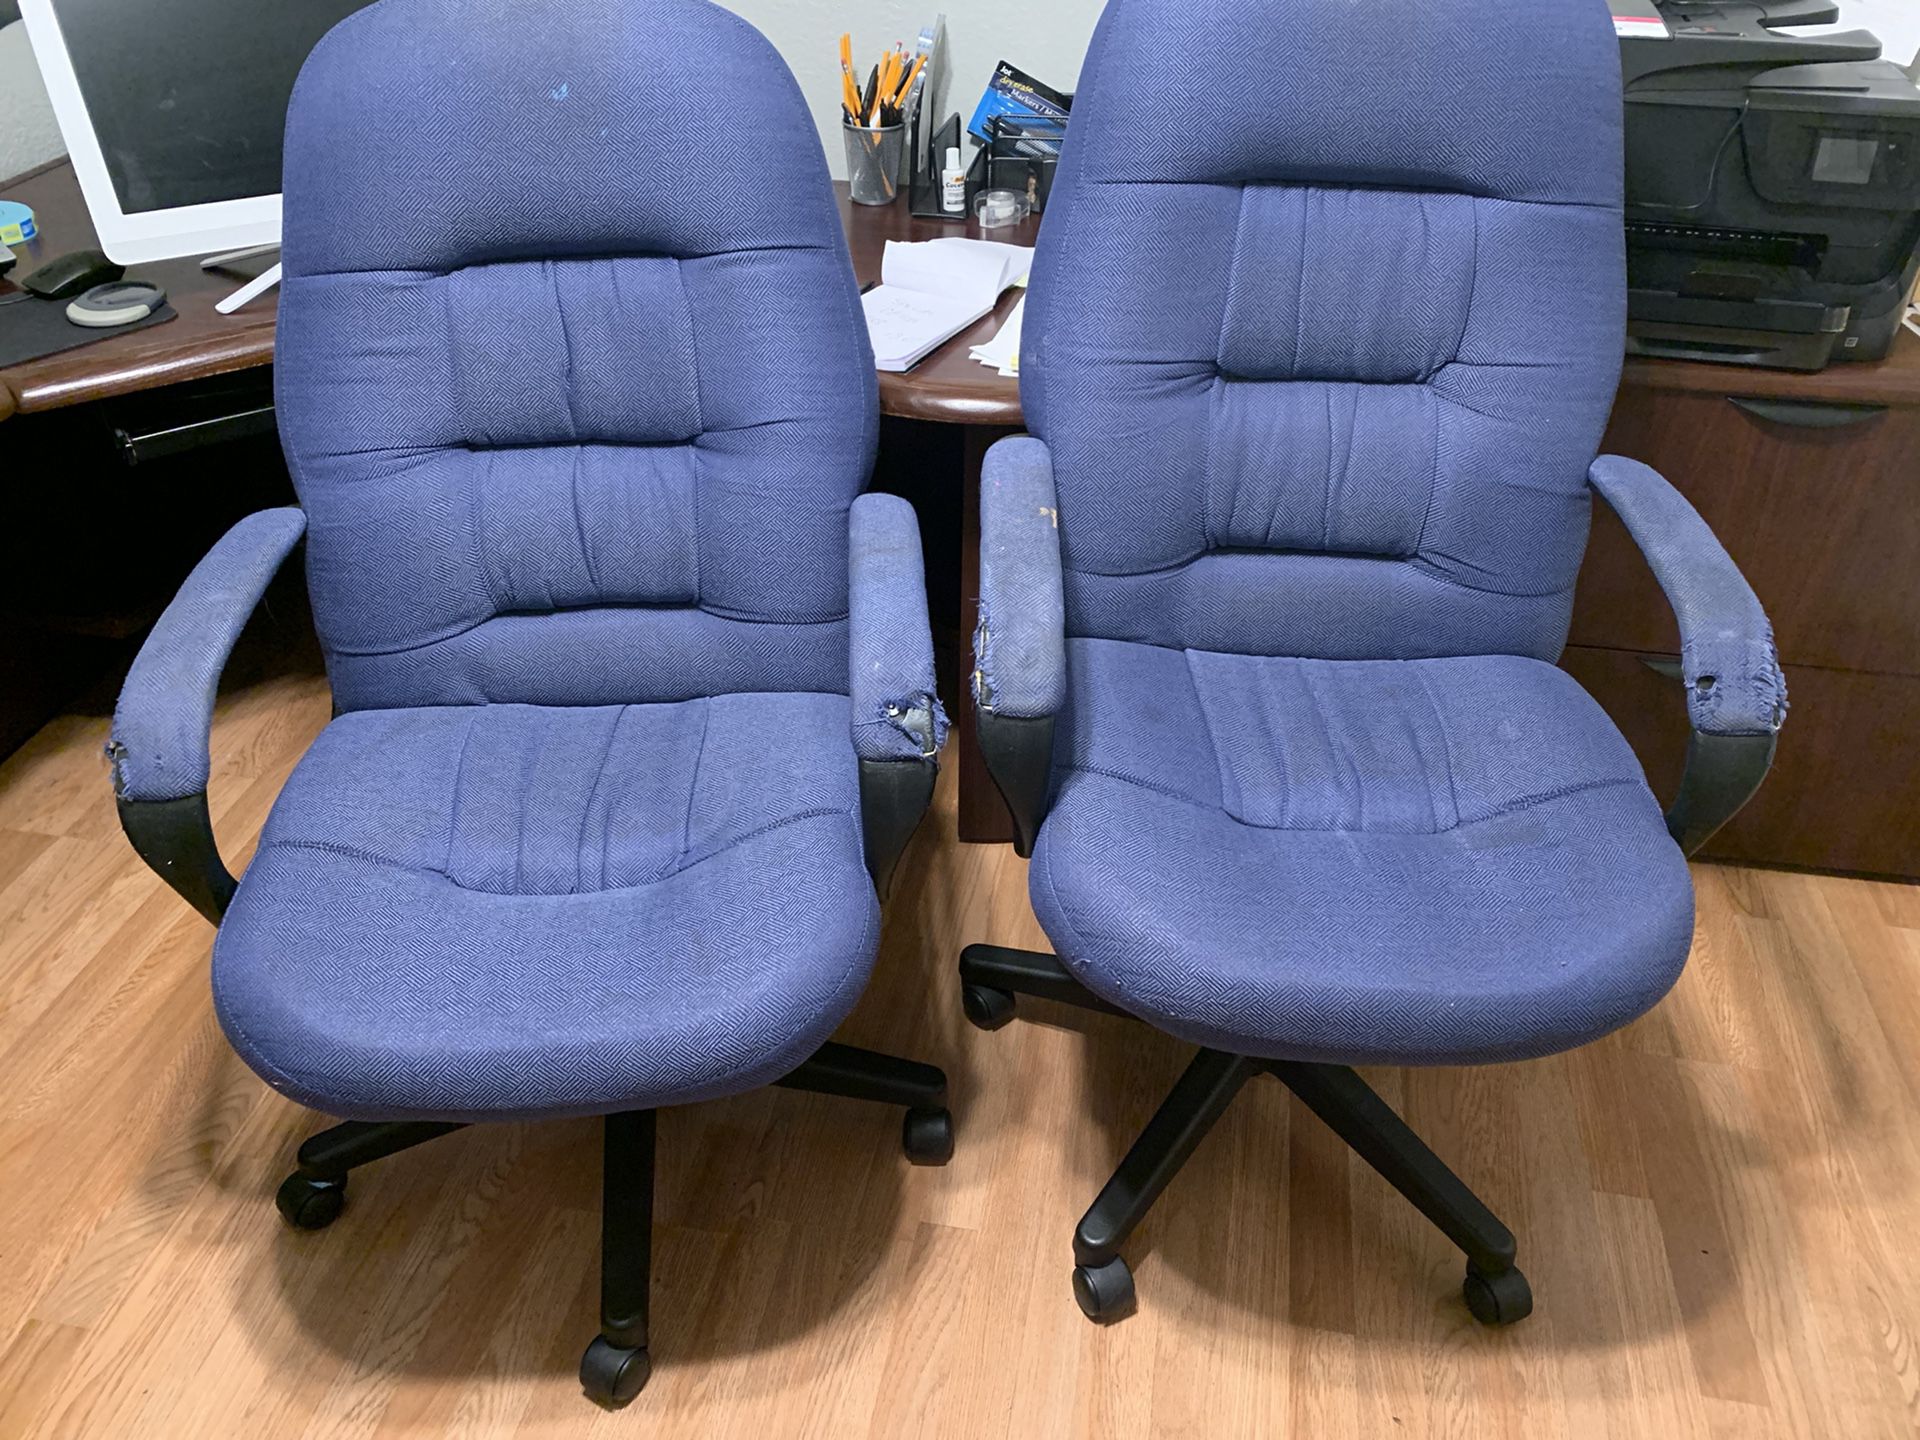 Two matching office chairs needs a little TLC both for 25 no shipping